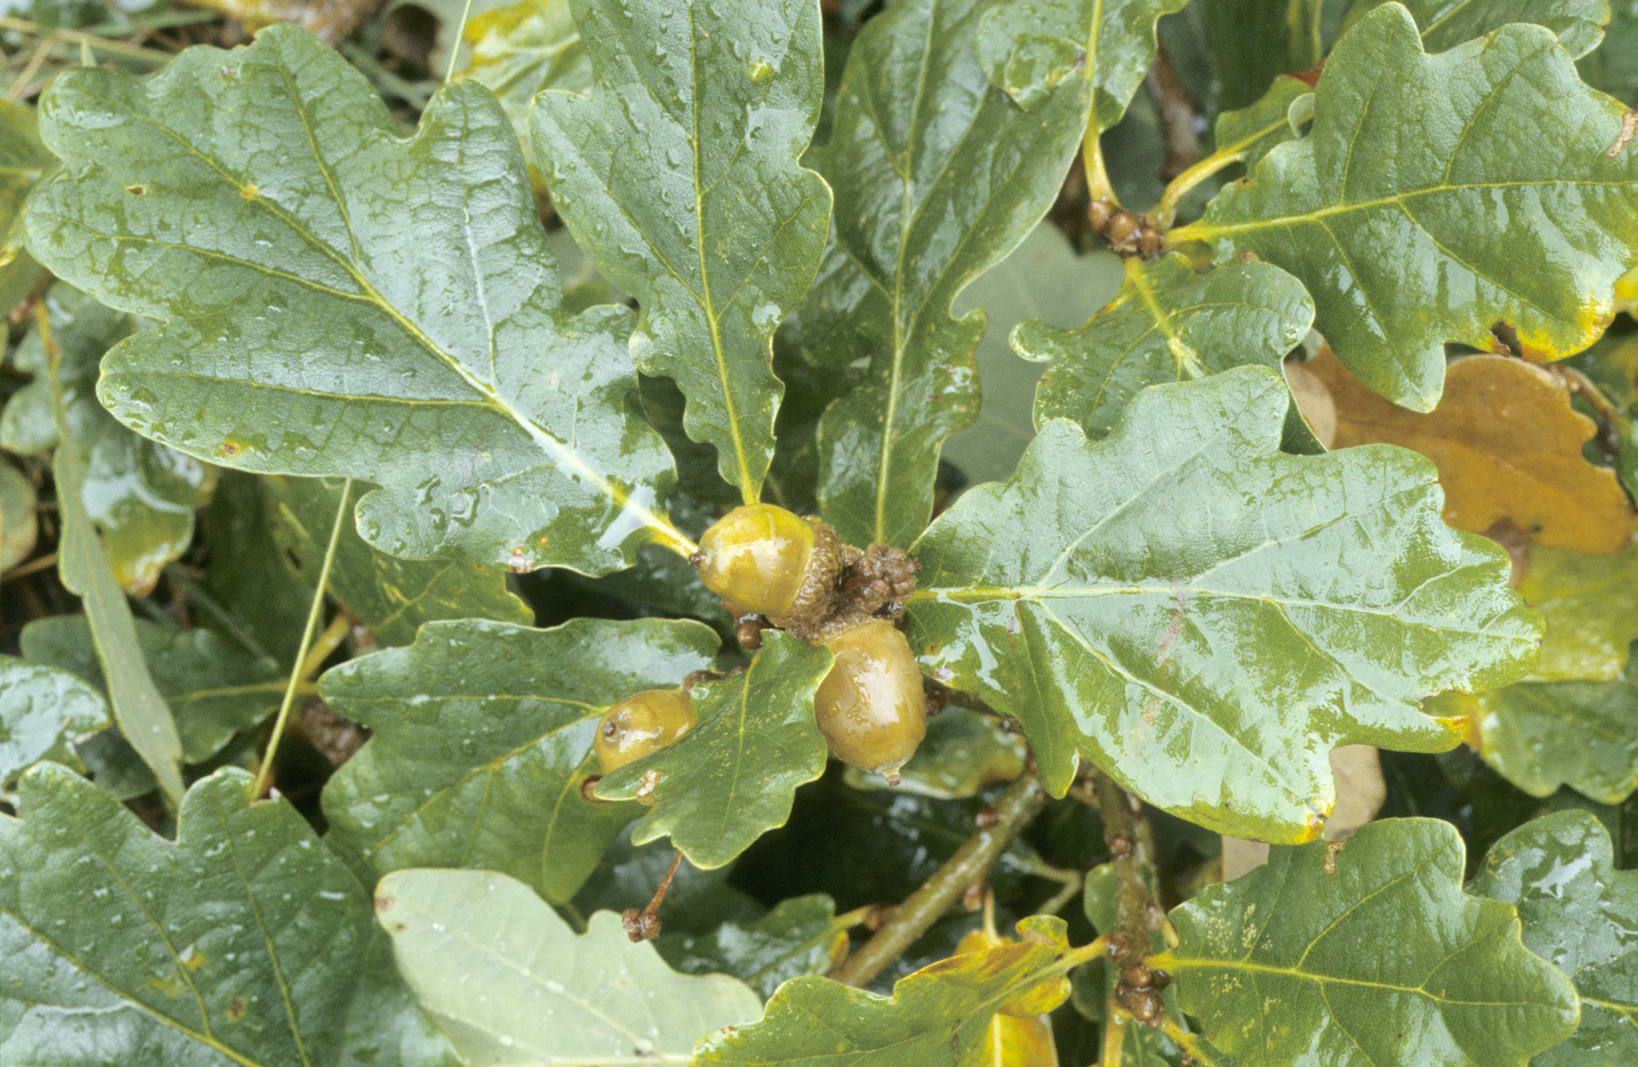 Sessile oak - Quercus petraea showing stalked leaves and acorns with no pedicle (stalk).